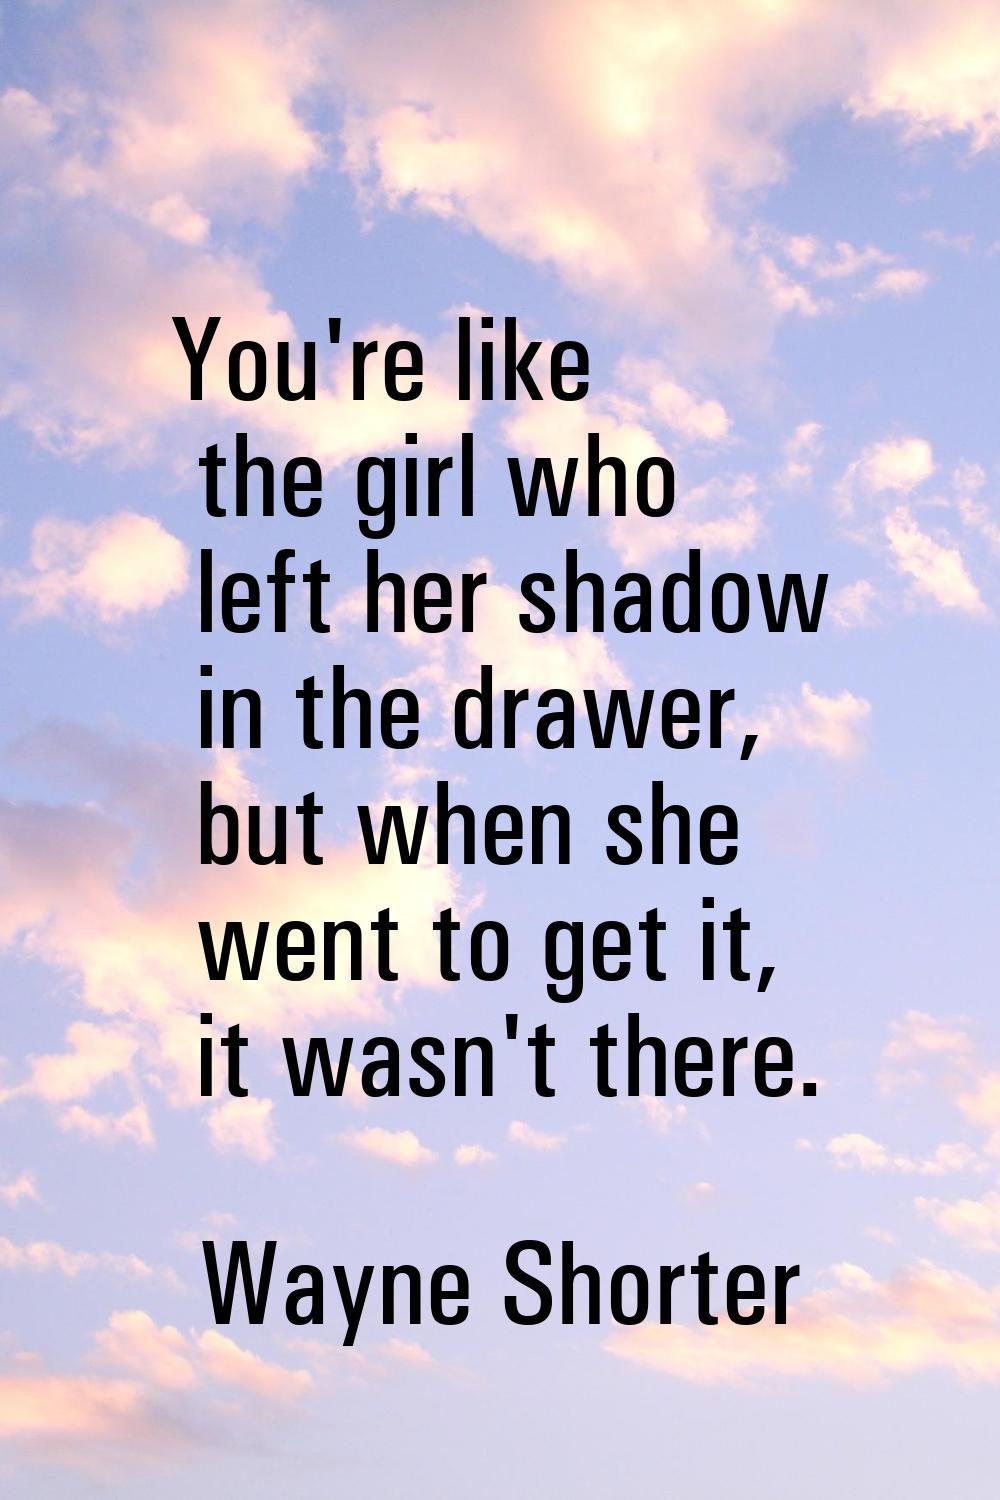 You're like the girl who left her shadow in the drawer, but when she went to get it, it wasn't ther